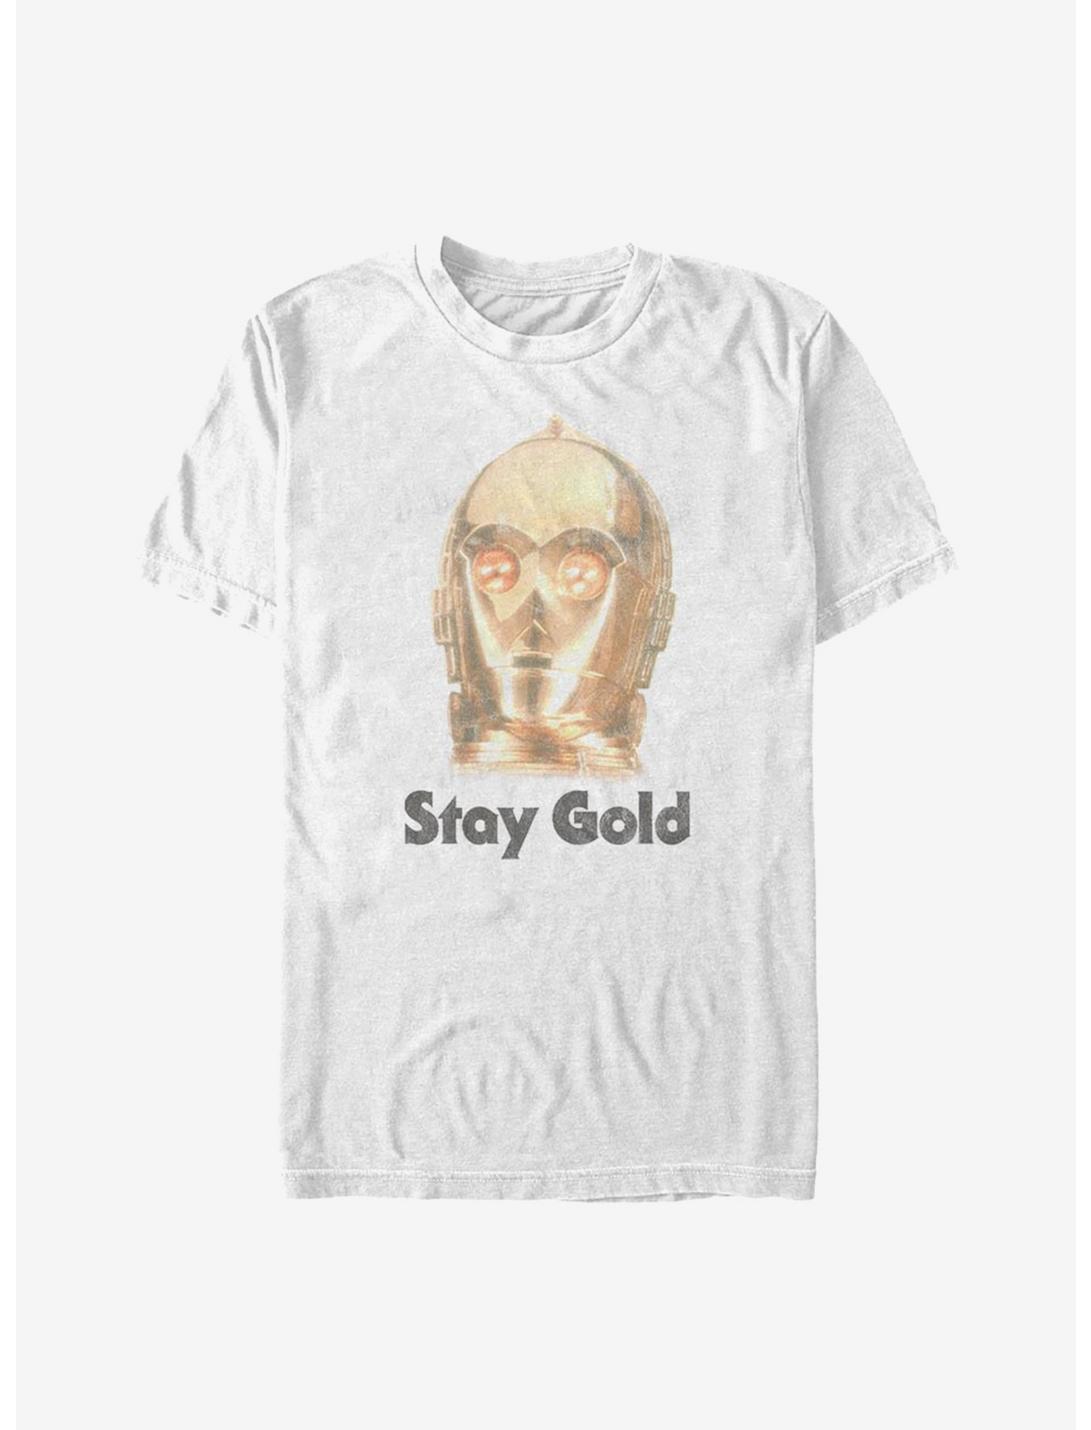 Star Wars Episode IX The Rise Of Skywalker Stay Gold T-Shirt, WHITE, hi-res